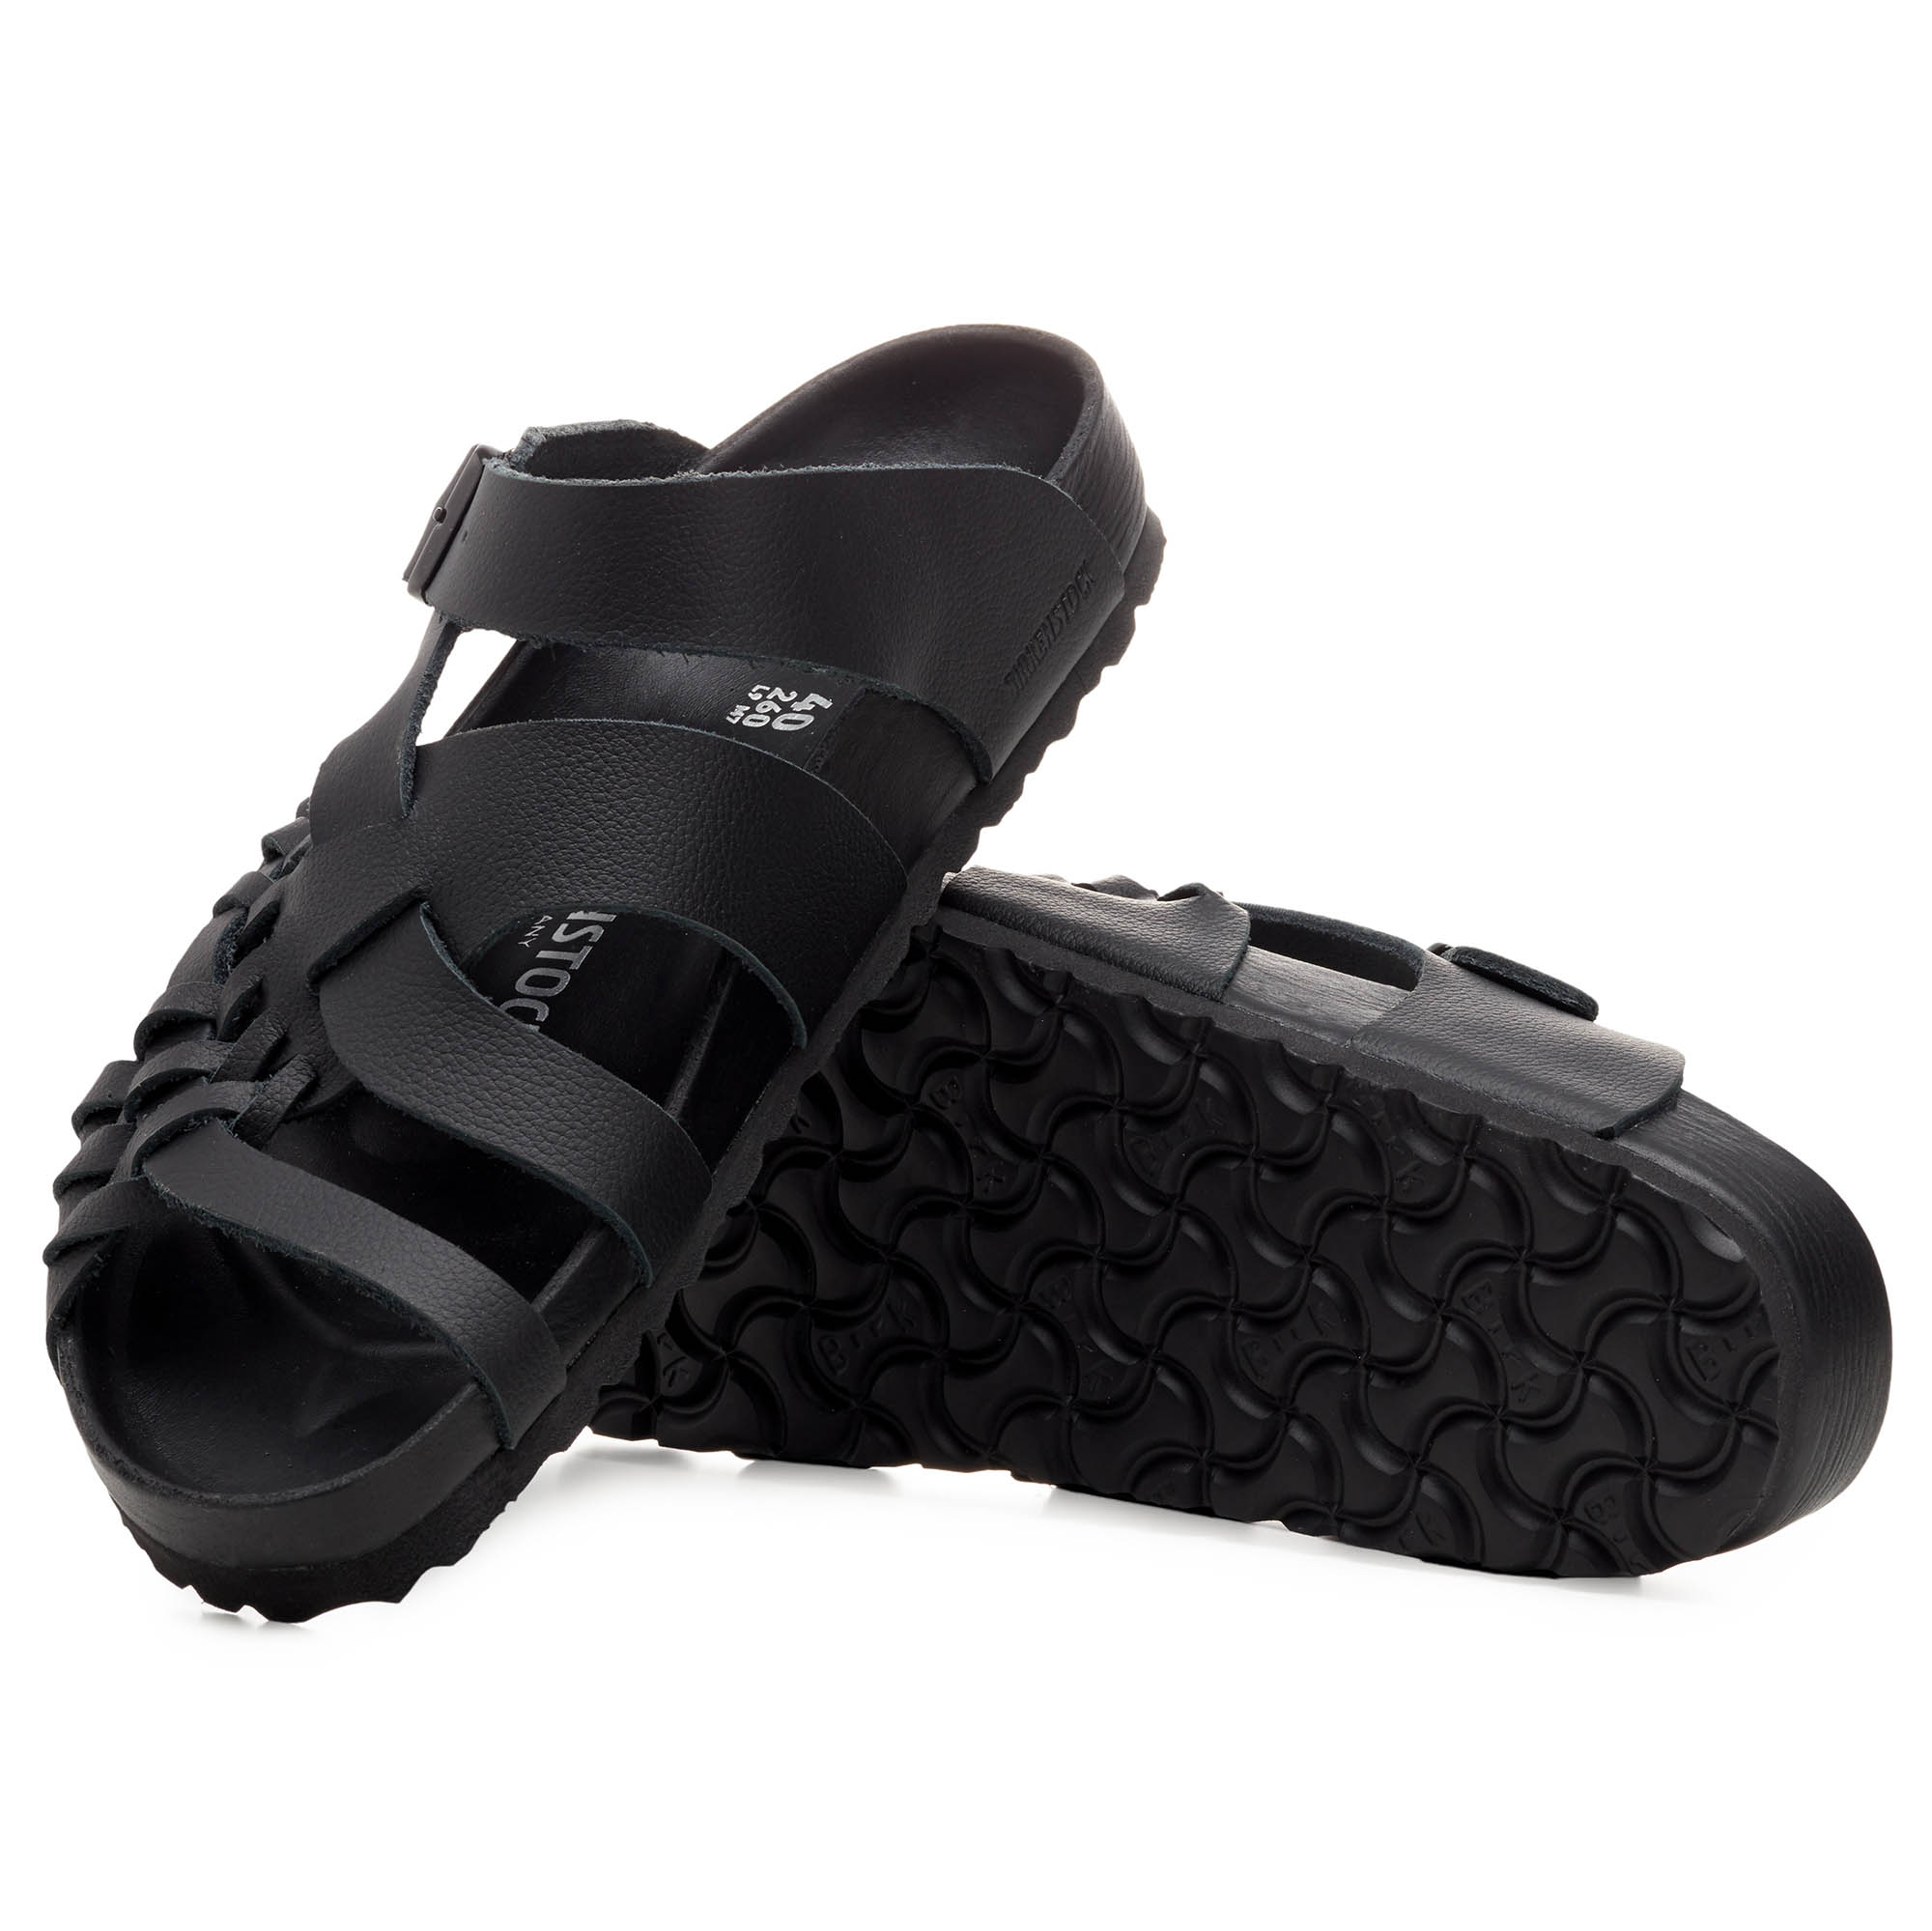 CSM Tallahassee Archive Re-Issue Style Nubuck Leather Black | BIRKENSTOCK